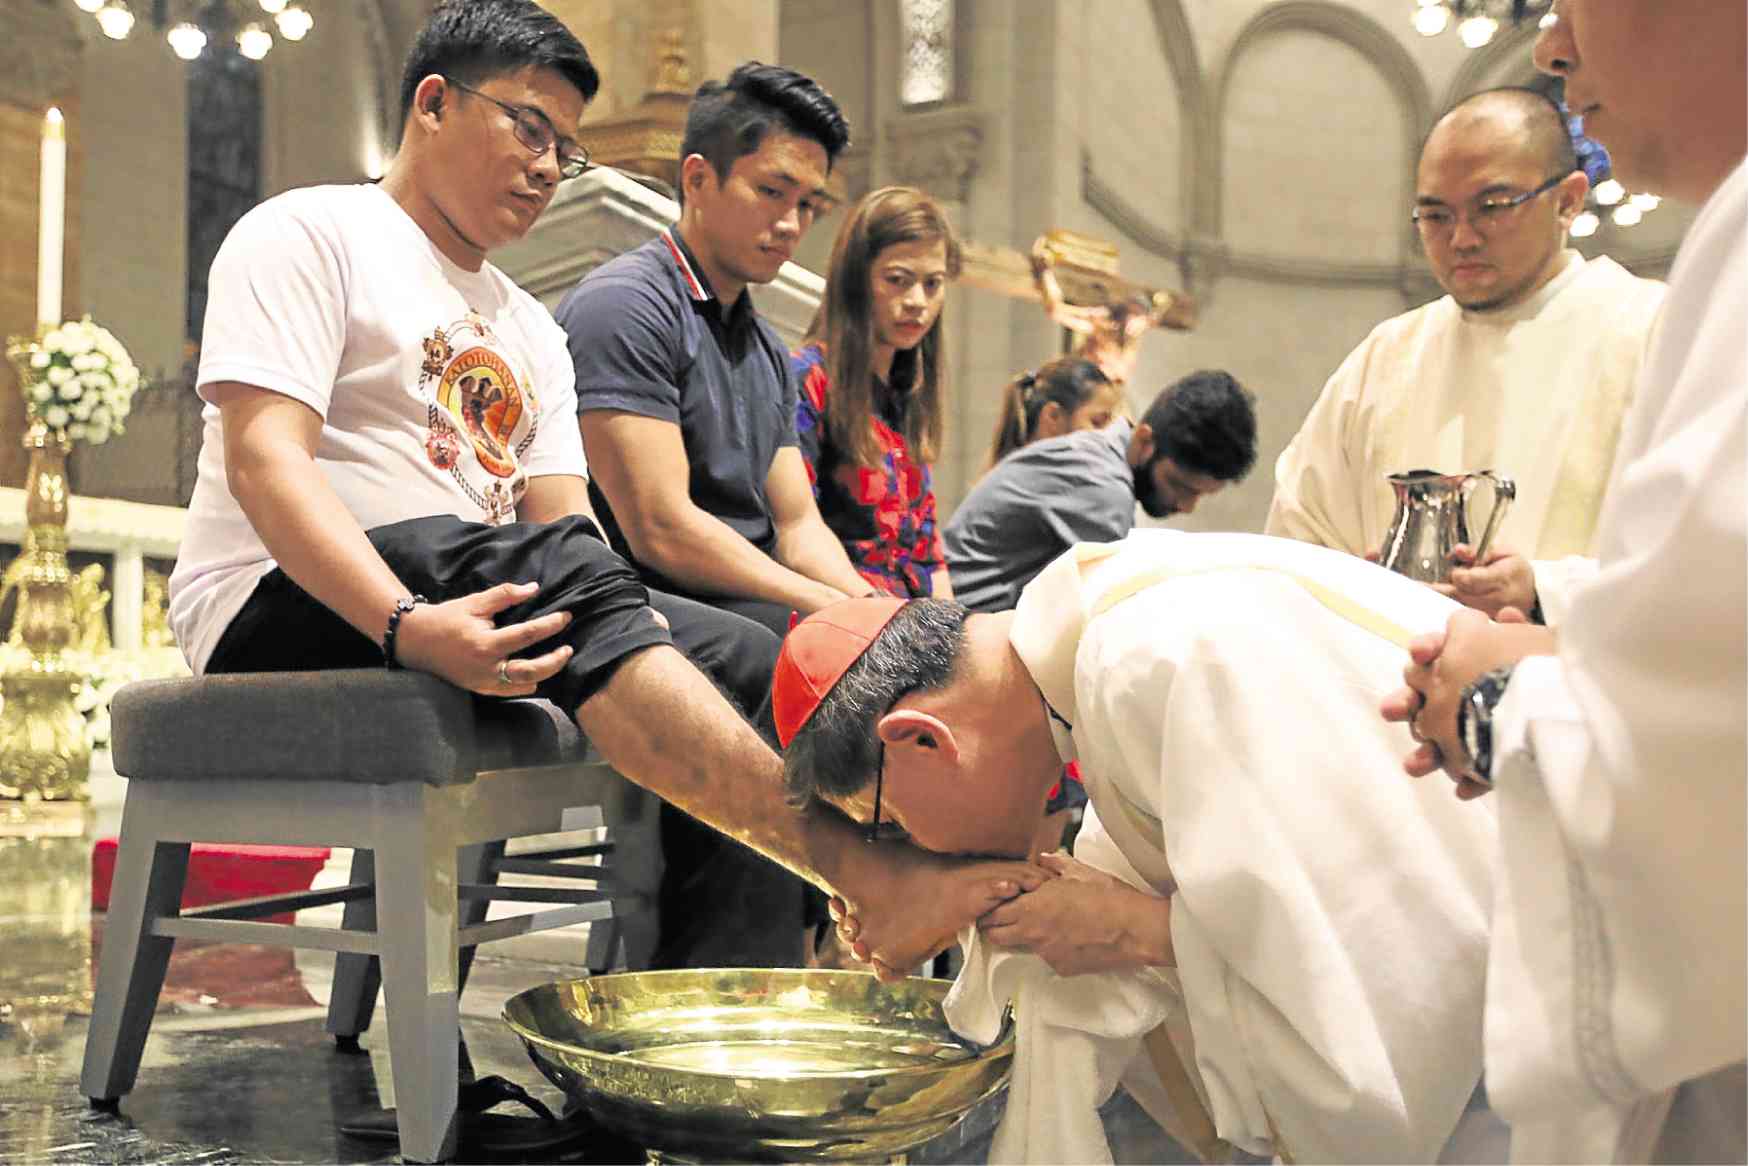 Tagle: Fight unrelenting evil with acts of kindness